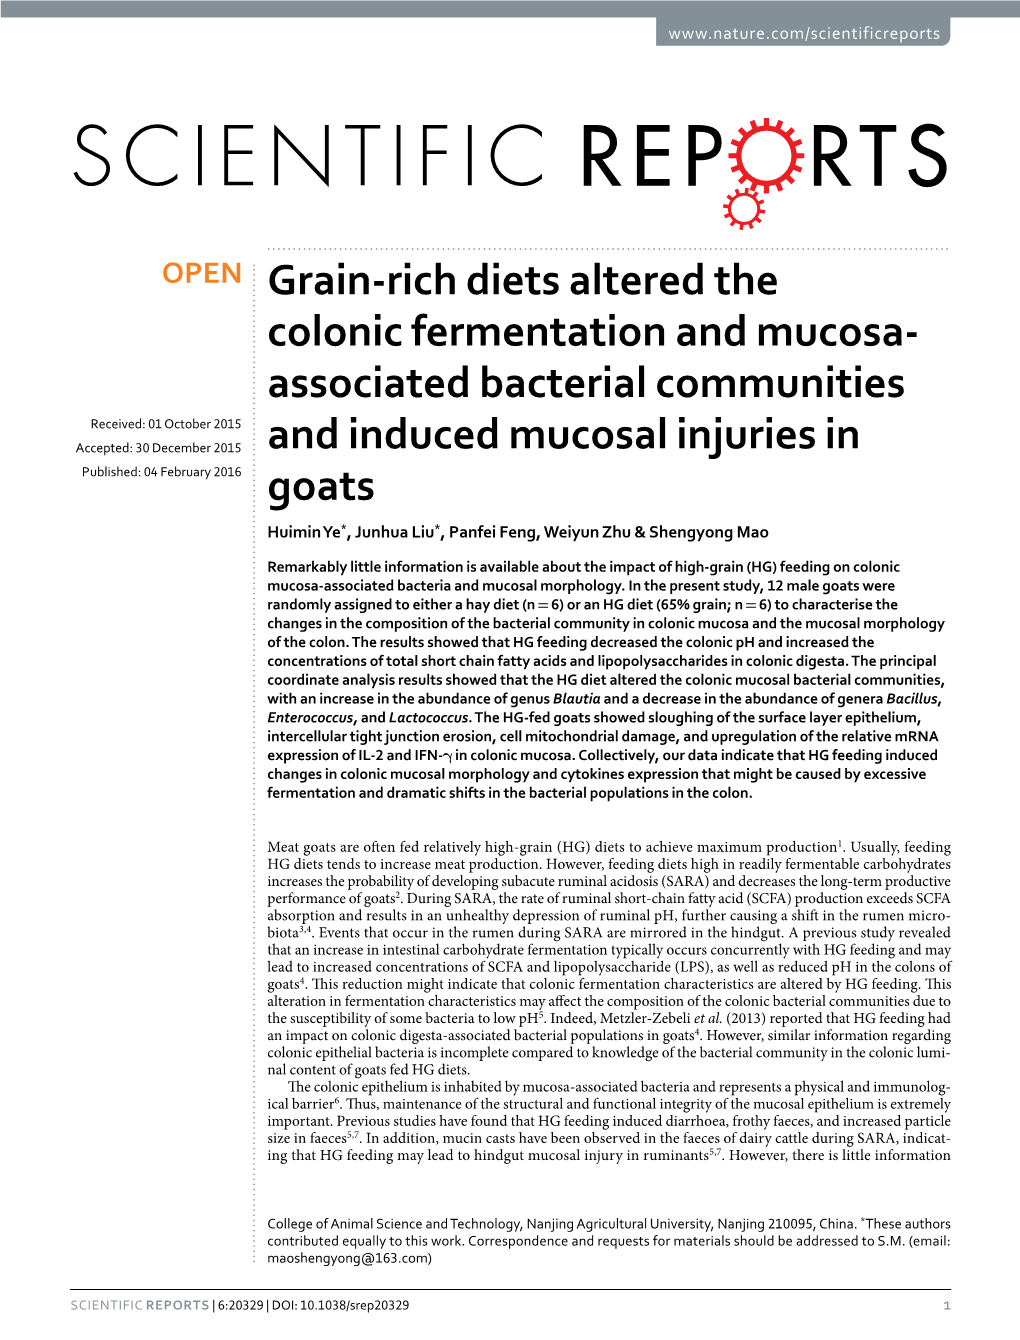 Grain-Rich Diets Altered the Colonic Fermentation and Mucosa-Associated Bacterial Communities and Induced Mucosal Injuries in Goats